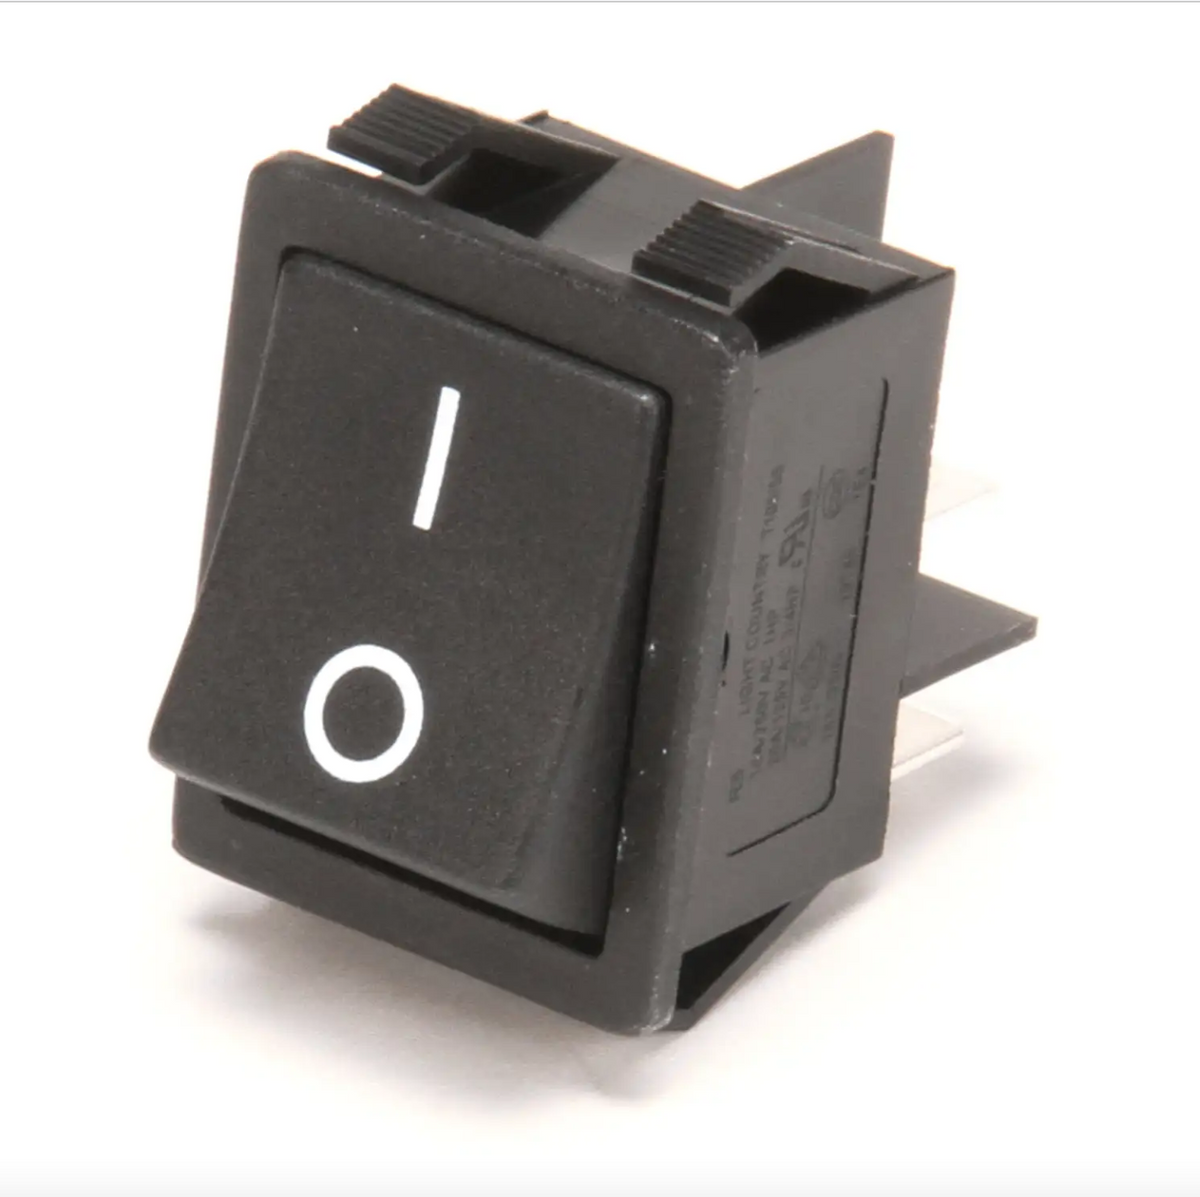 Crathco On-Off Rocker Switch, 4 Pins